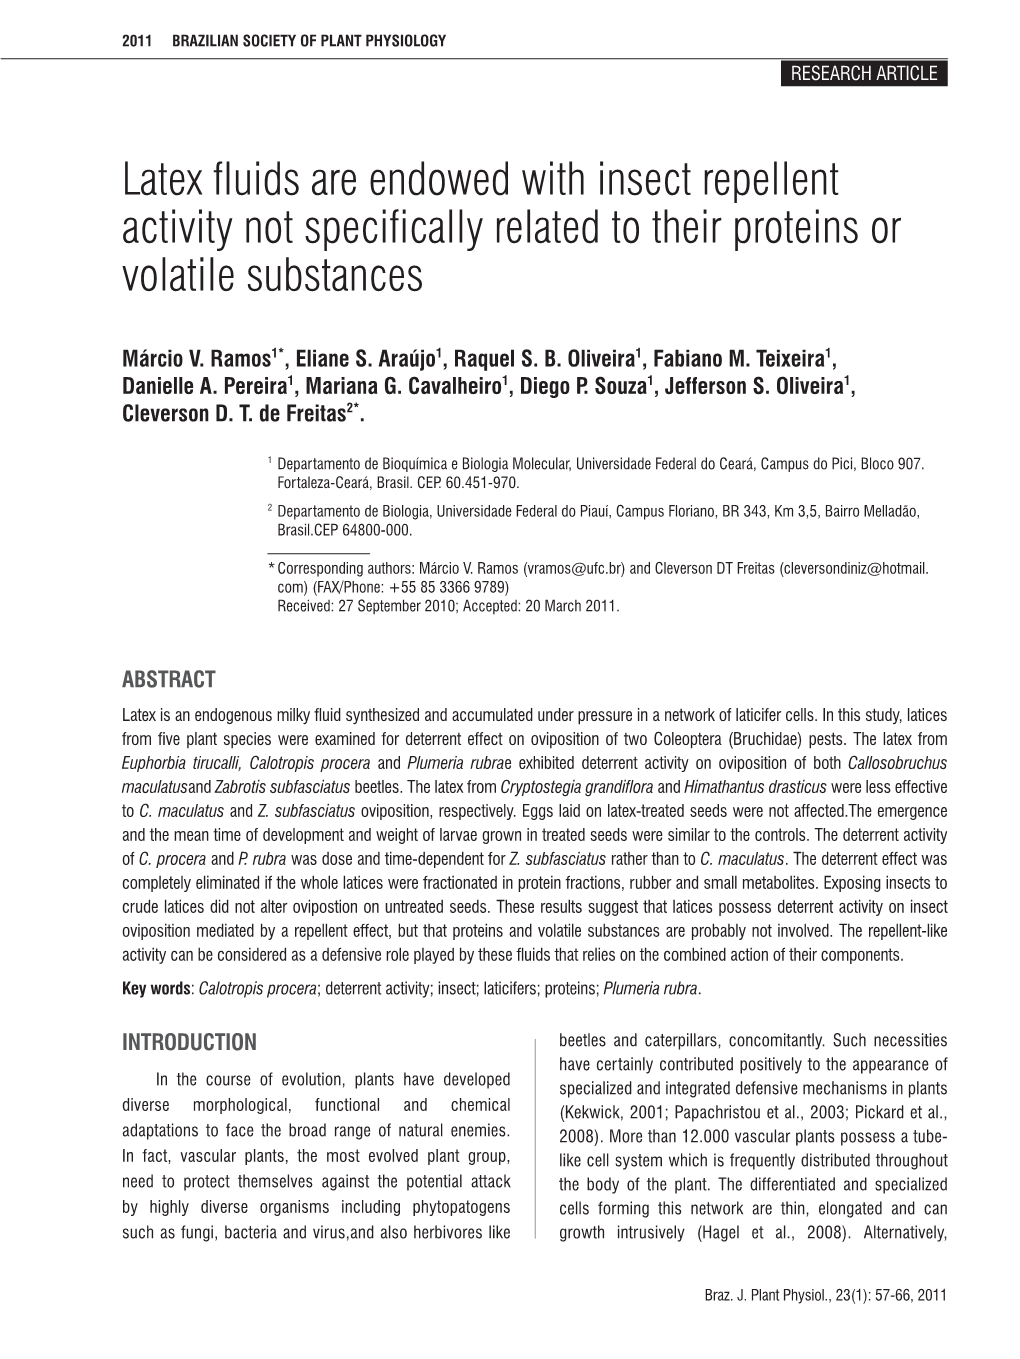 Latex Fluids Are Endowed with Insect Repellent Activity Not Specifically Related to Their Proteins Or Volatile Substances